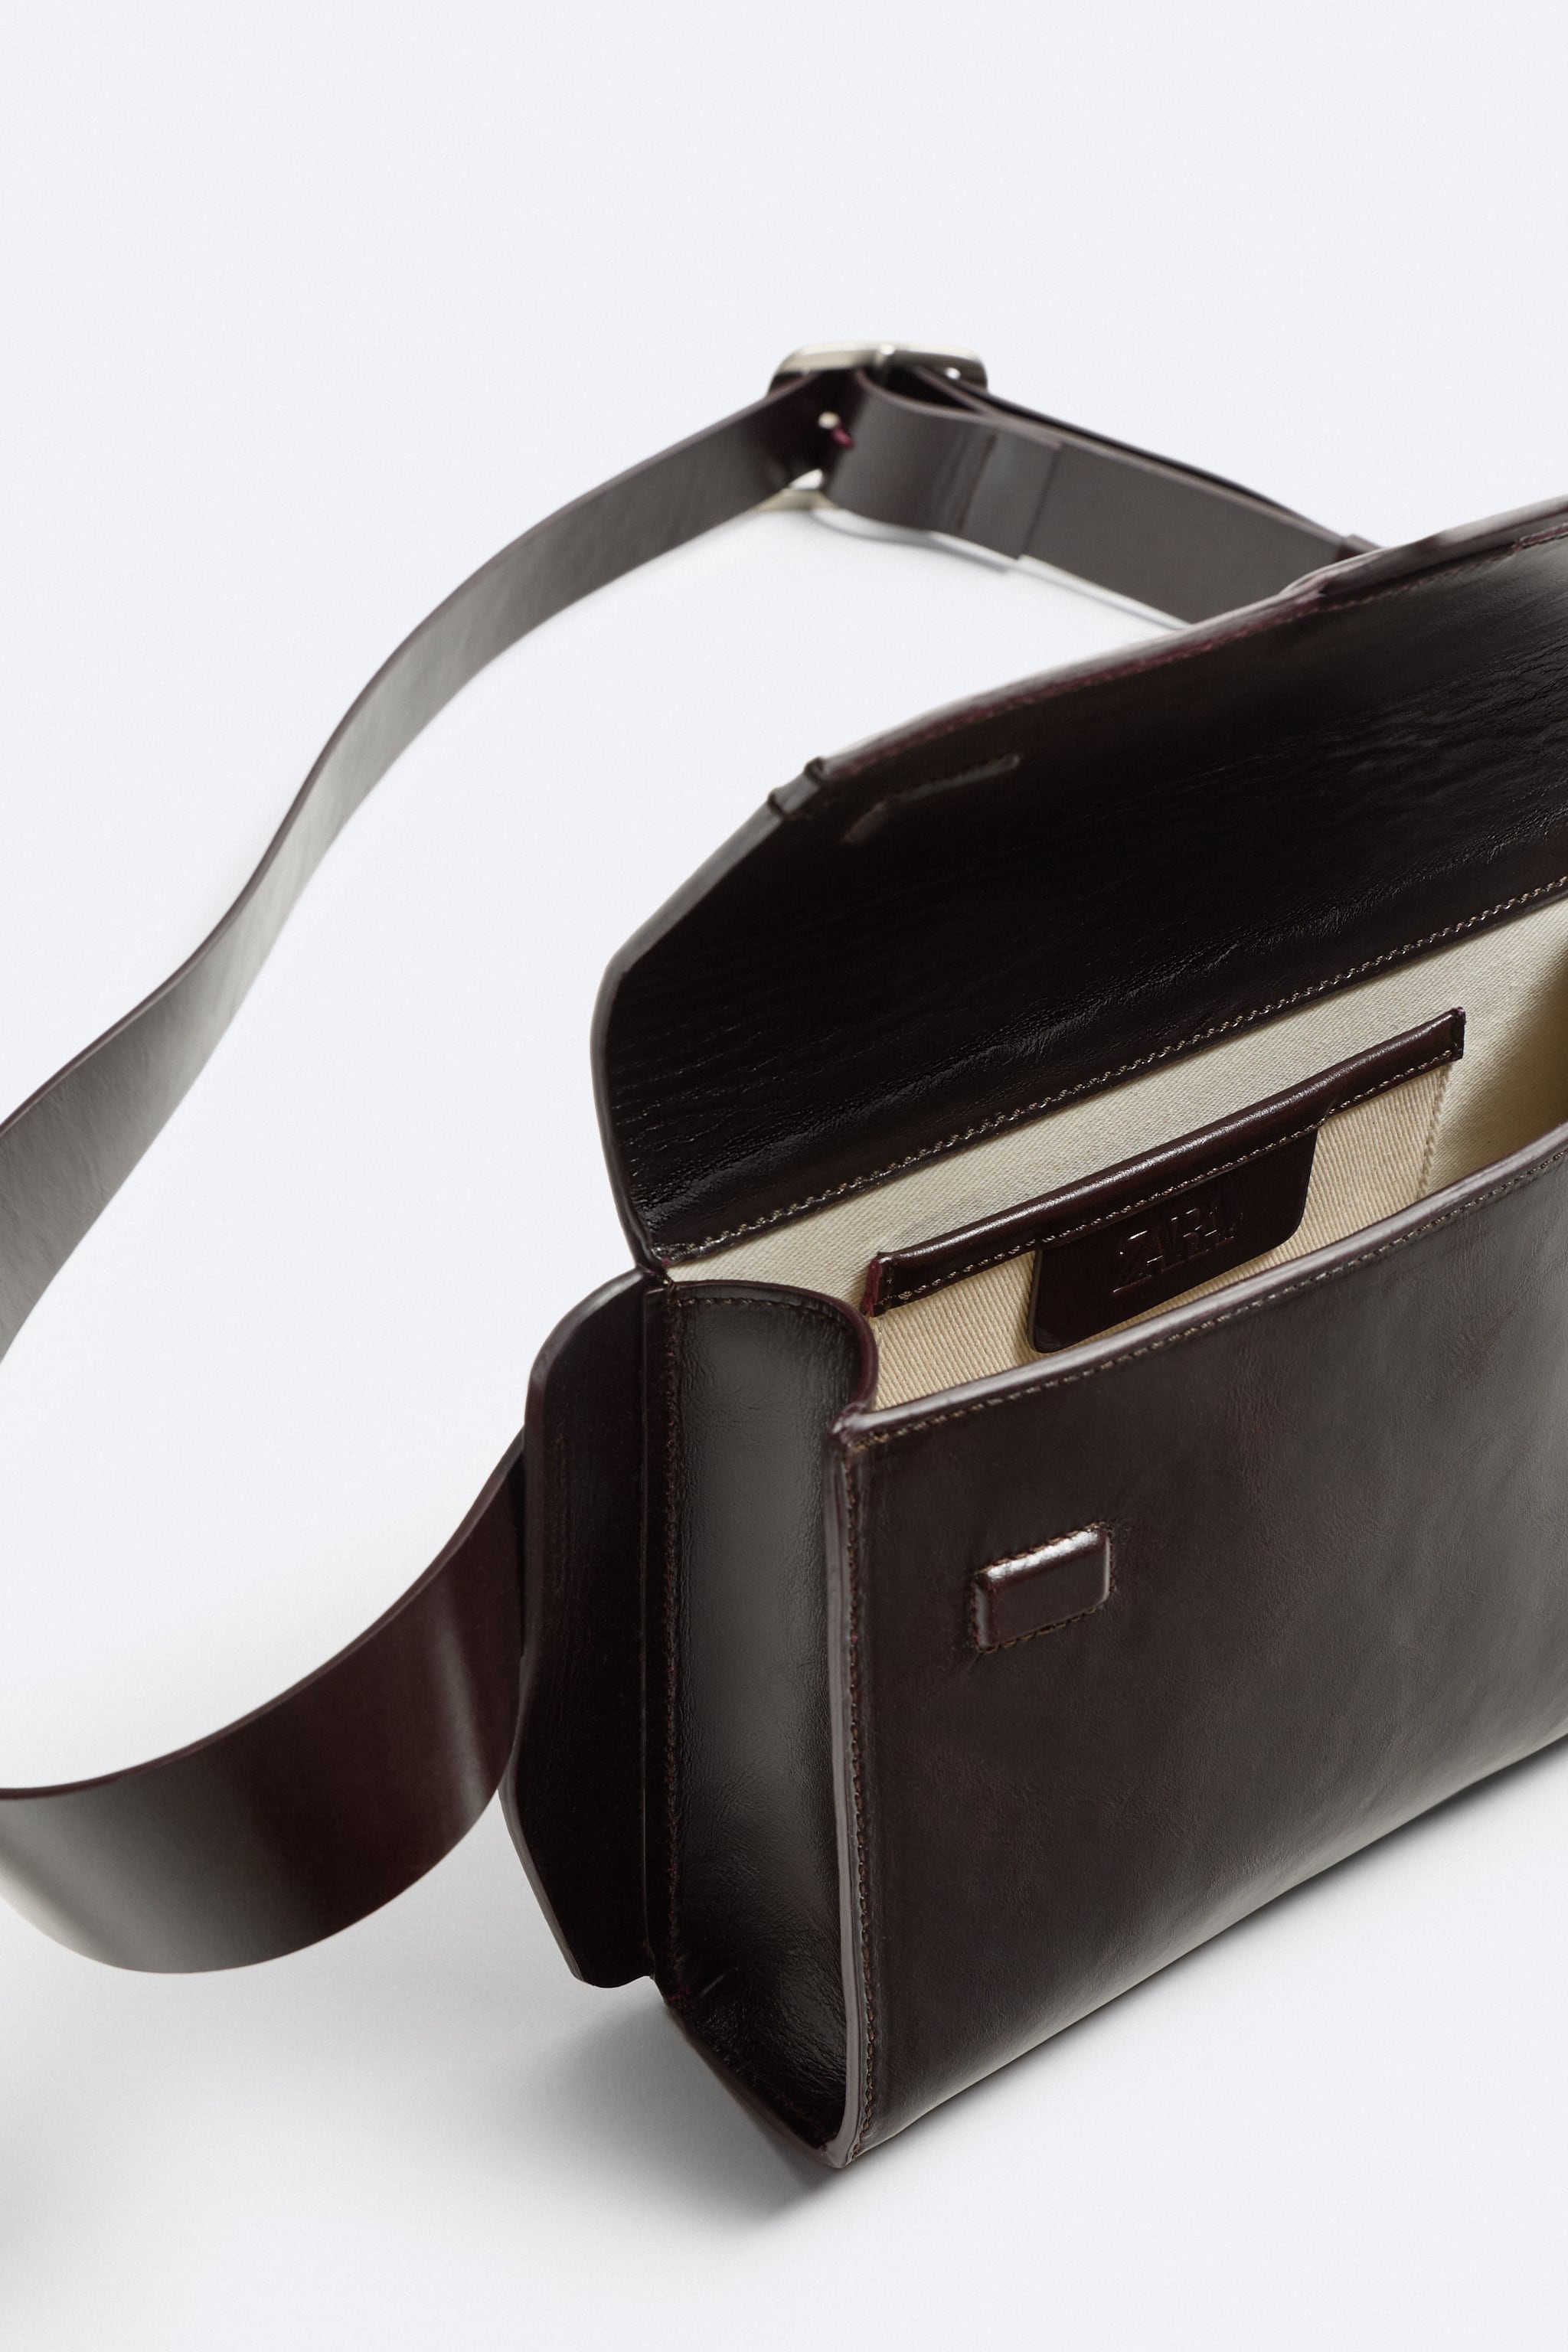 NAPPA LEATHER CROSSBODY BAG - LIMITED EDITION